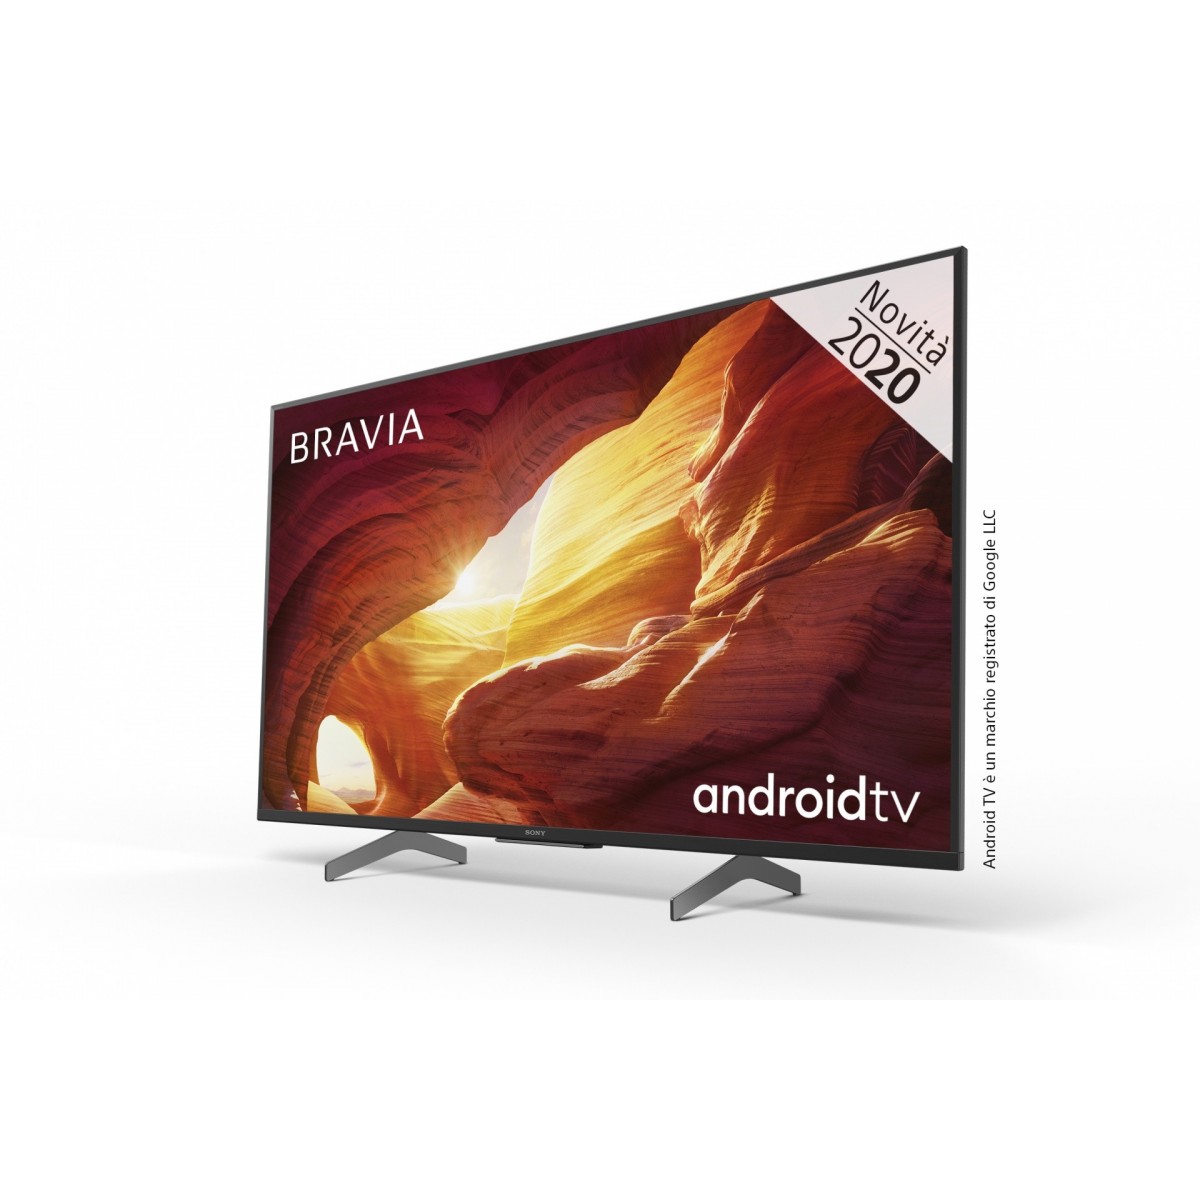 Sony Kd 43xh85 Android Tv 43 Pollici Smart Tv Led 4k Hdr Ultra Hd Con Assistenti Vocali 6807